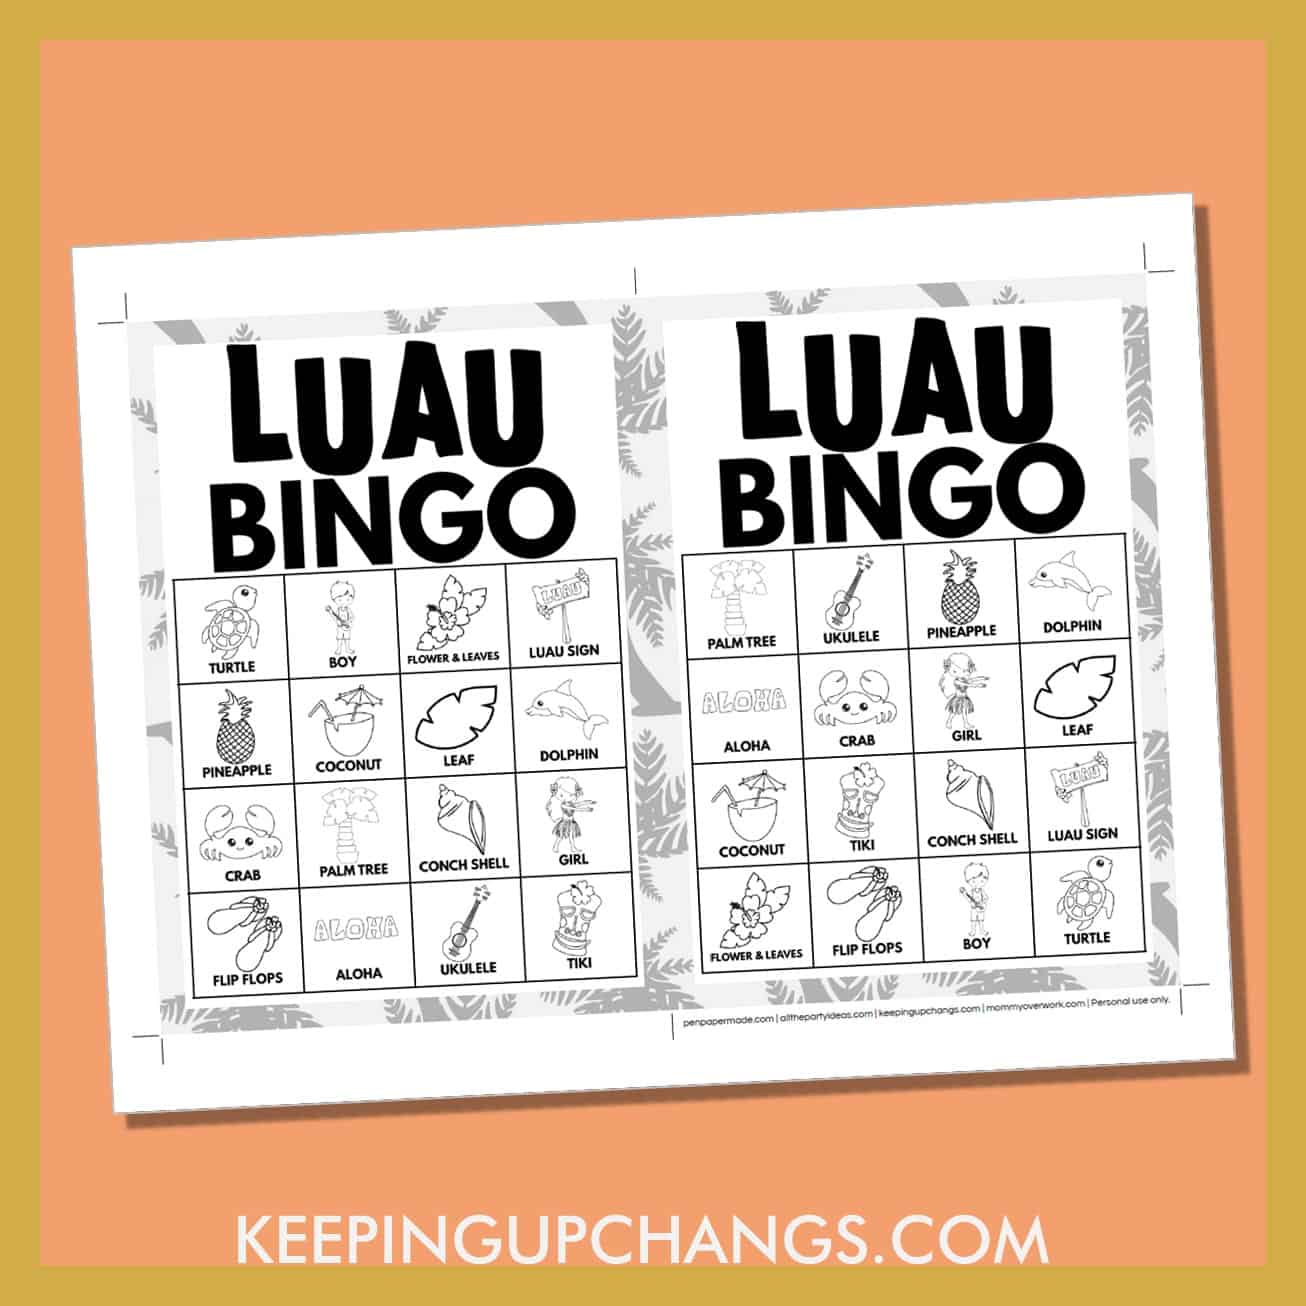 free hawaiian luau bingo card 4x4 5x7 game boards with black, white images and text words.